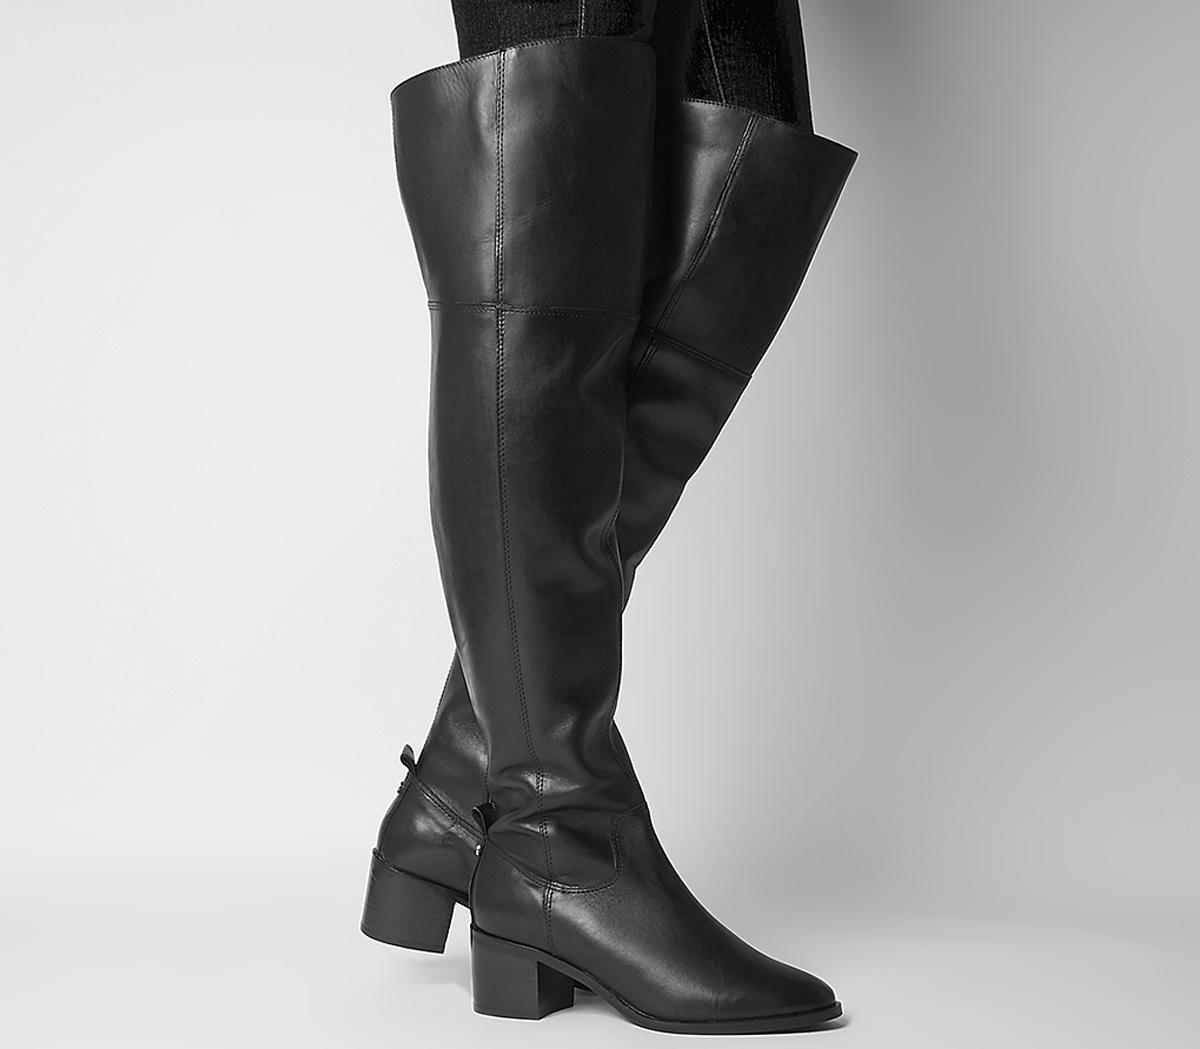 Office Katelyn Smart Over The Knee Boots Black Leather Knee High Boots